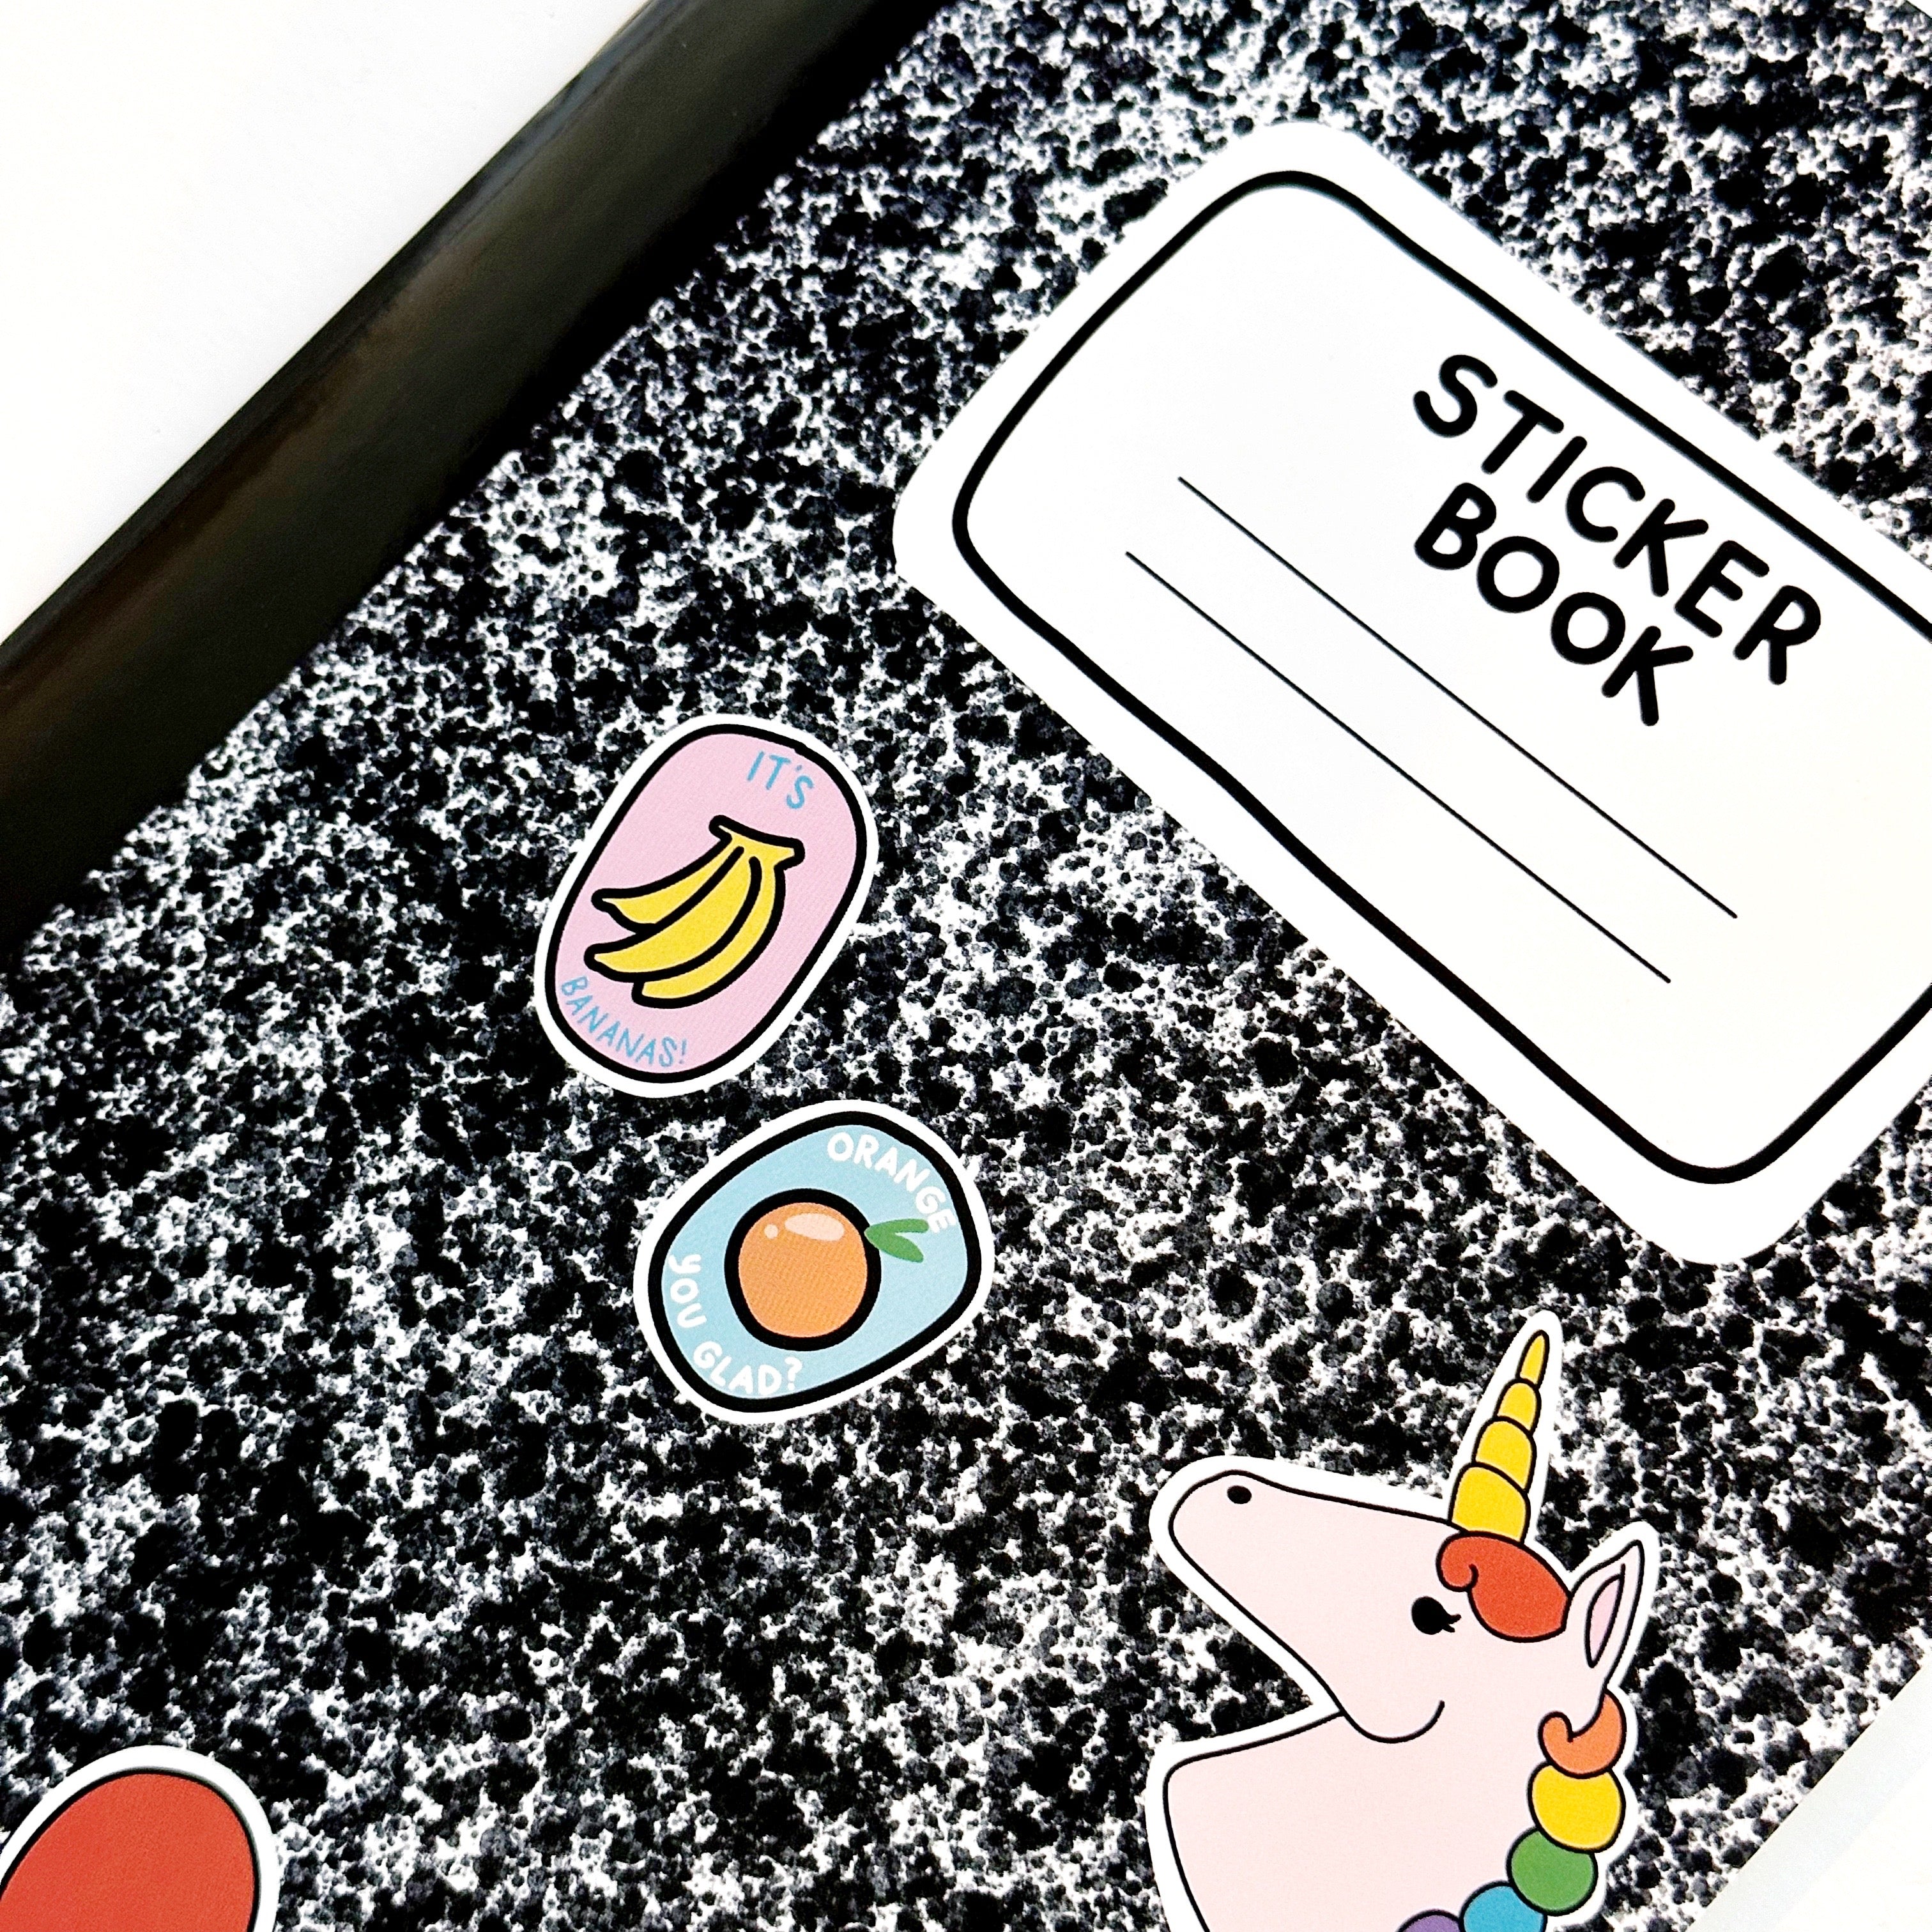 mage of black and white composition notebook as a sticker book with images of stickers on the front including a unicorn, heart, smiley face, orange and bananas with black text on white field says, "Sticker book" with lines for adding name."